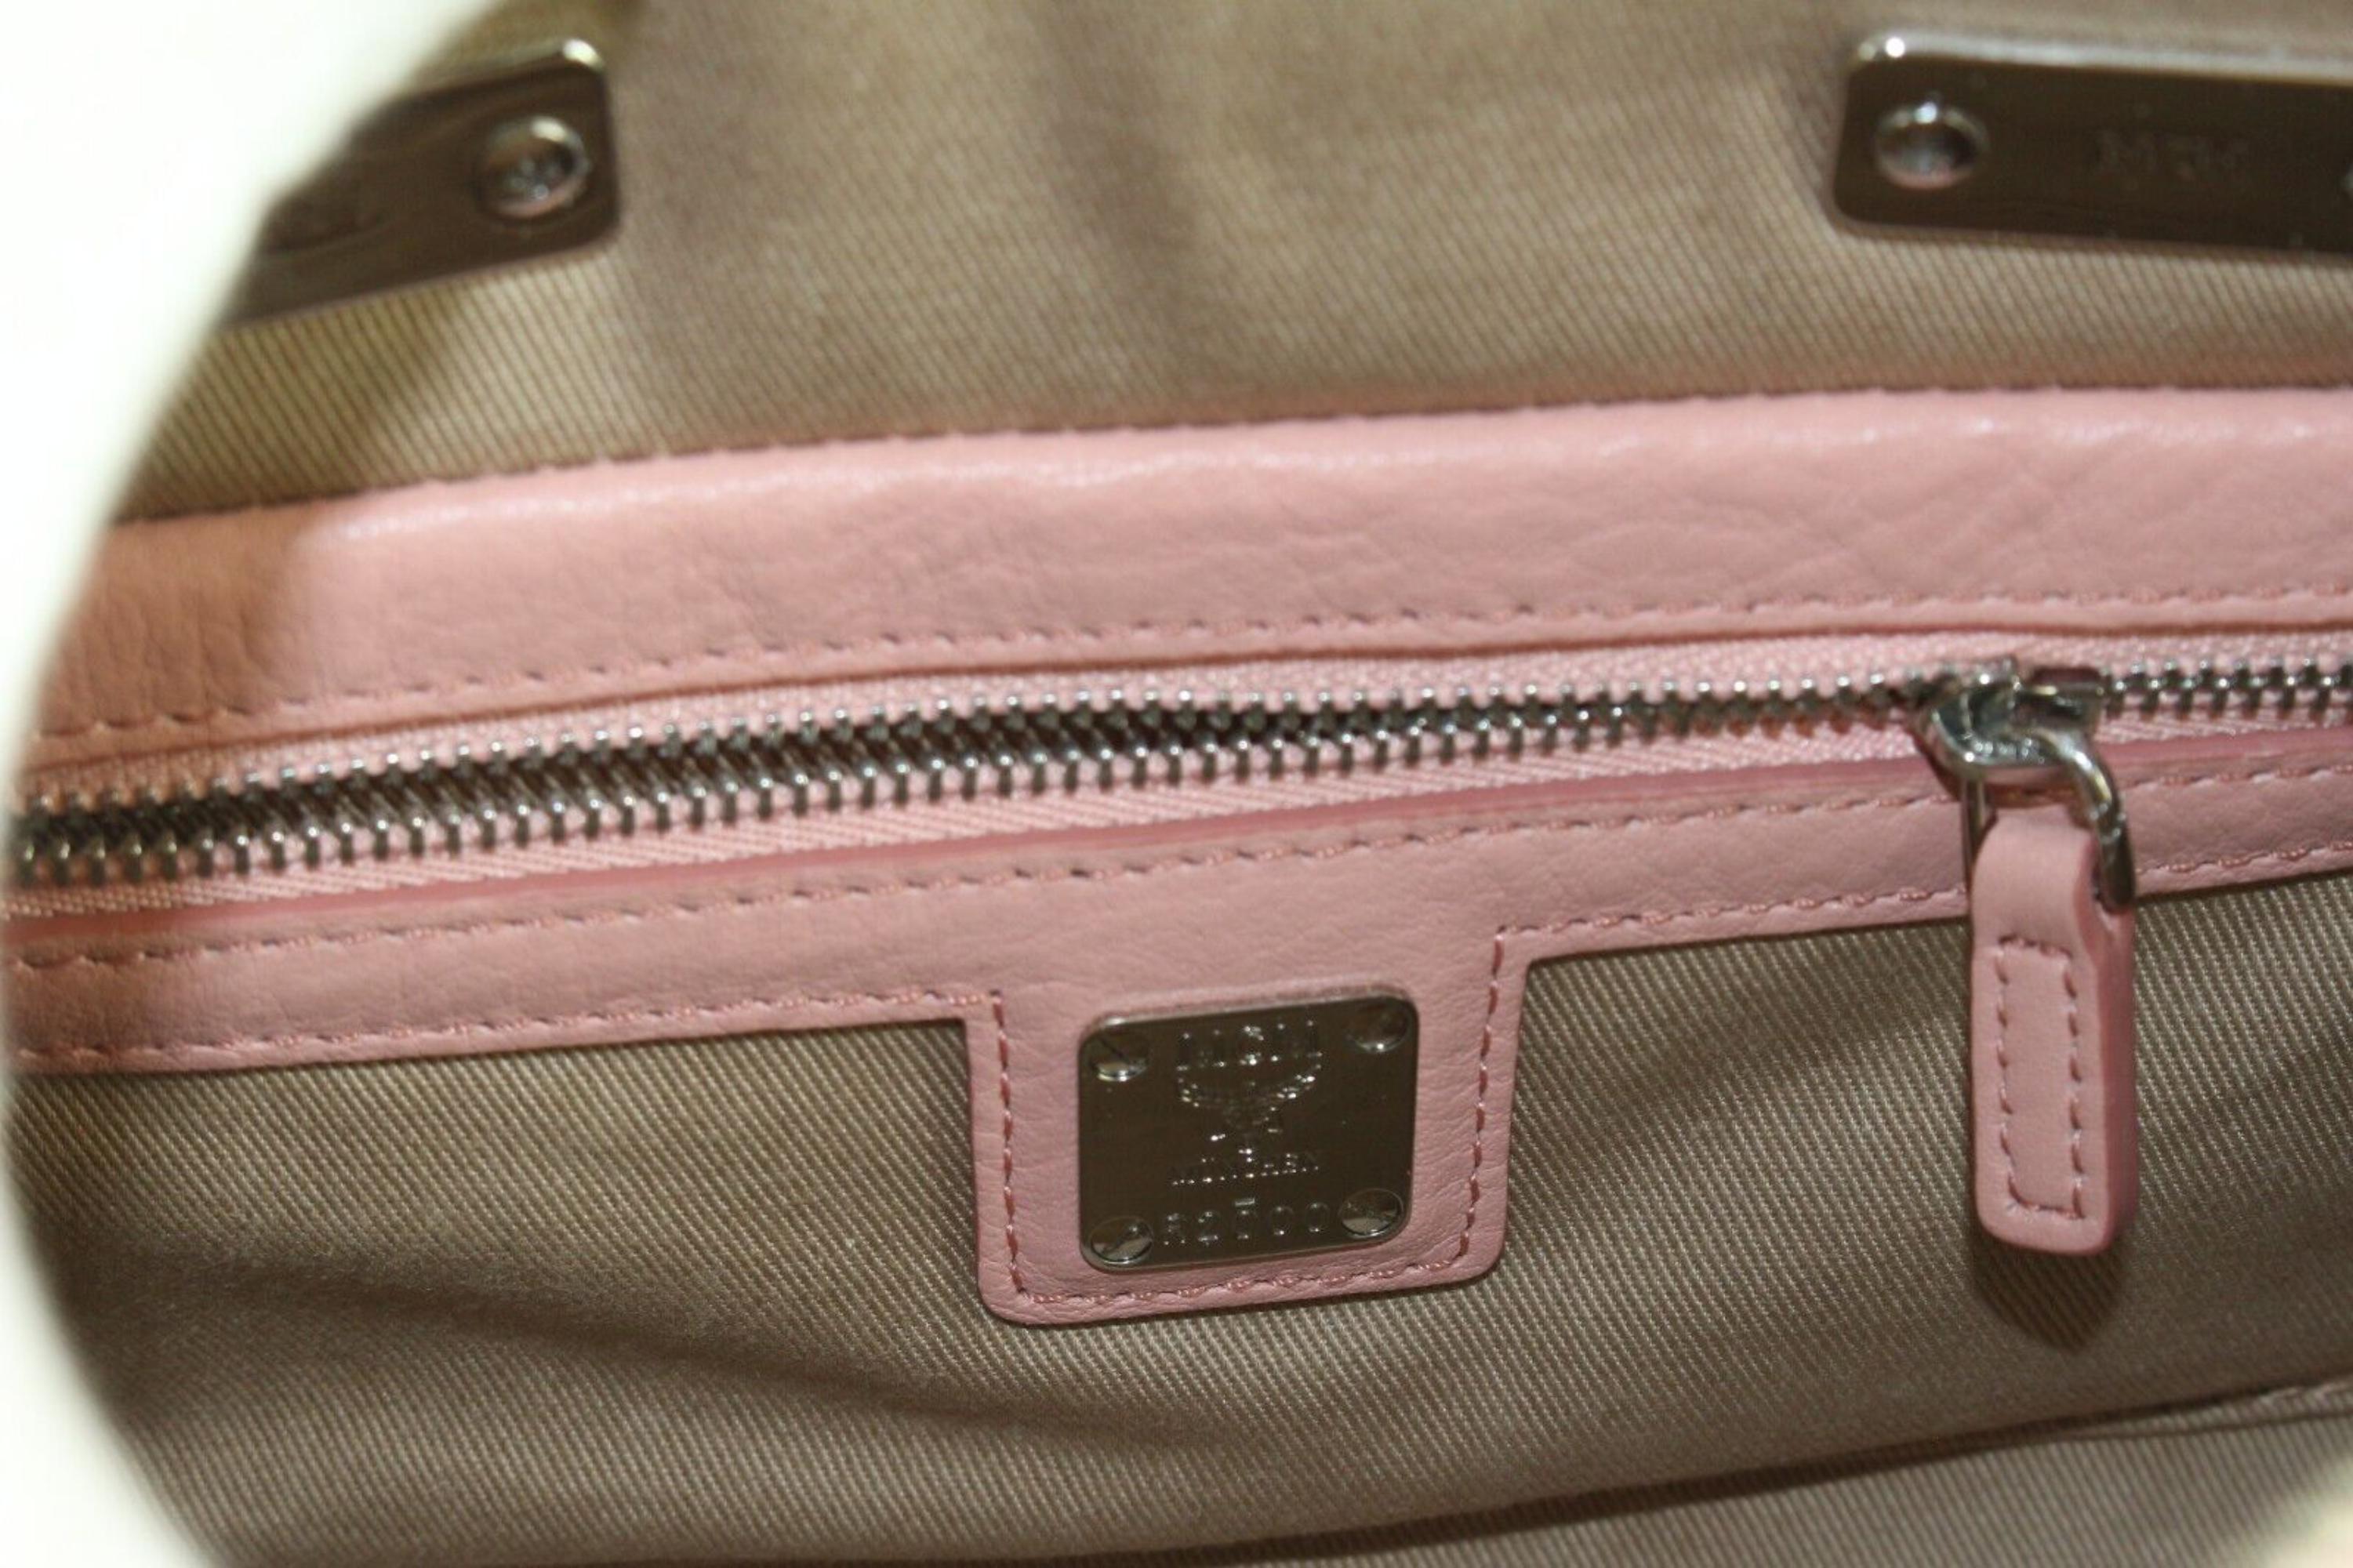 MCM Pink Blush Embossed Leather Boston Bag with Strap 1MCM0502 3